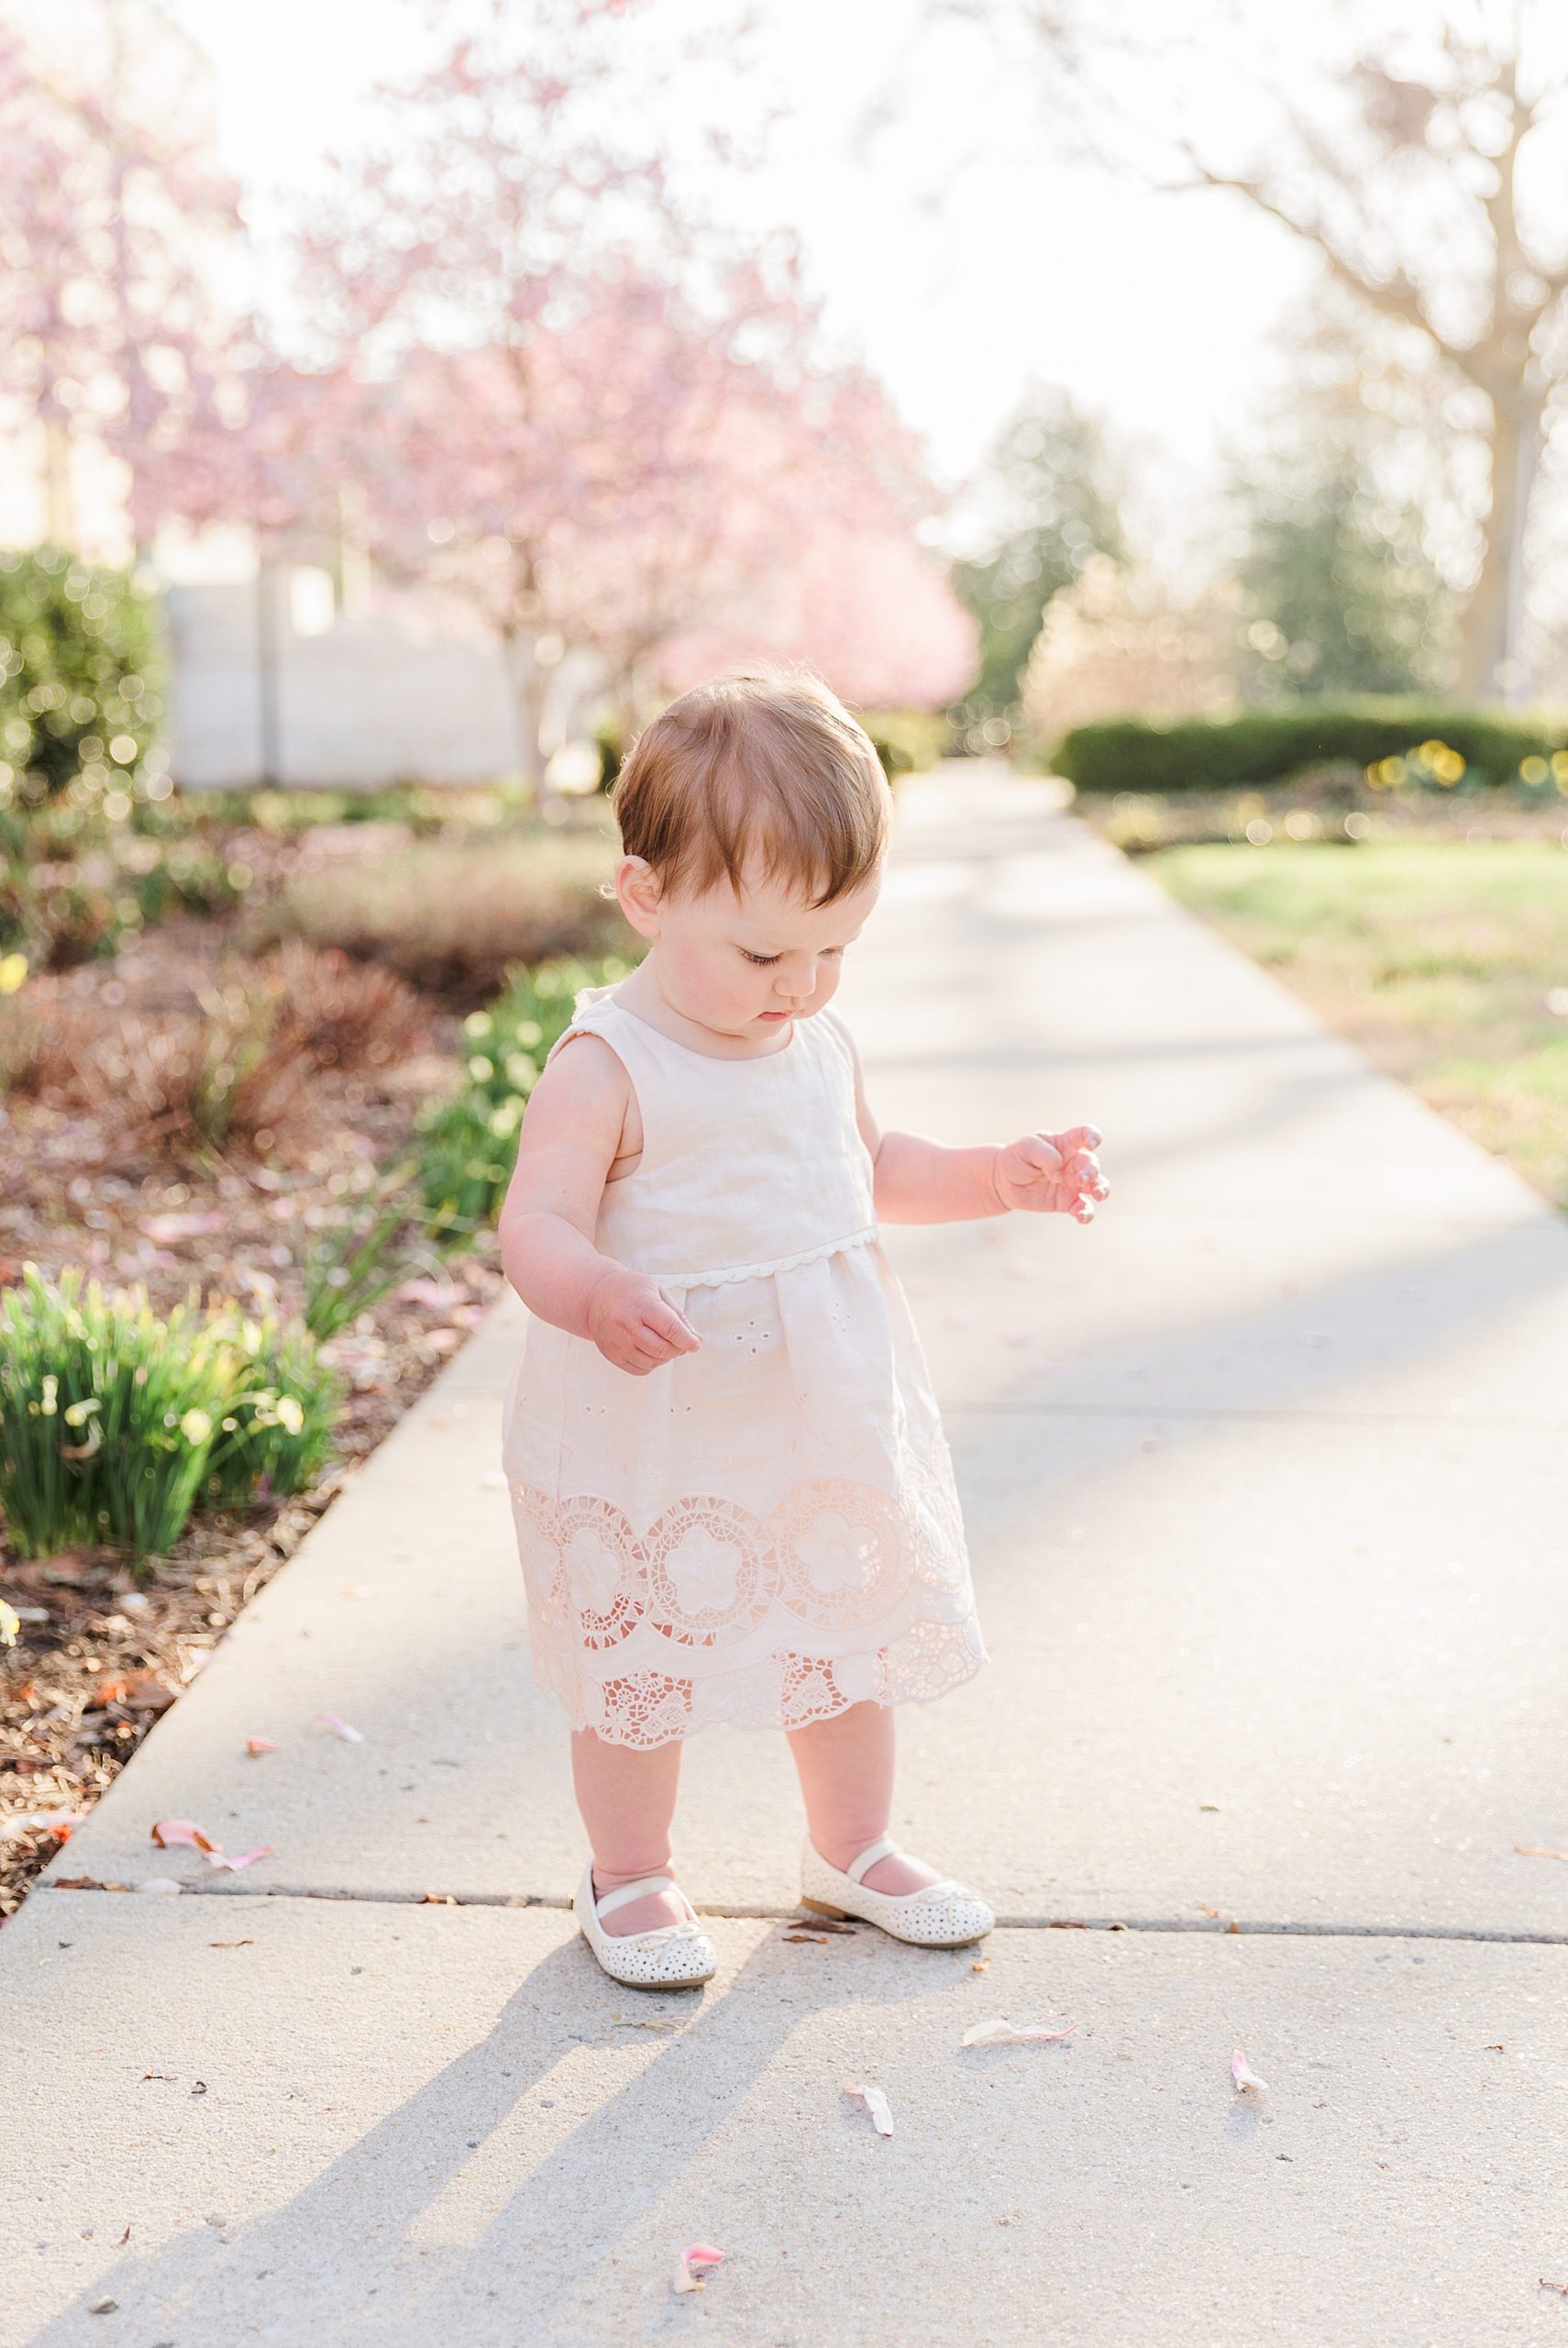 spring color palette for family photo outfits with pastel pink, robin egg blue, and neutrals